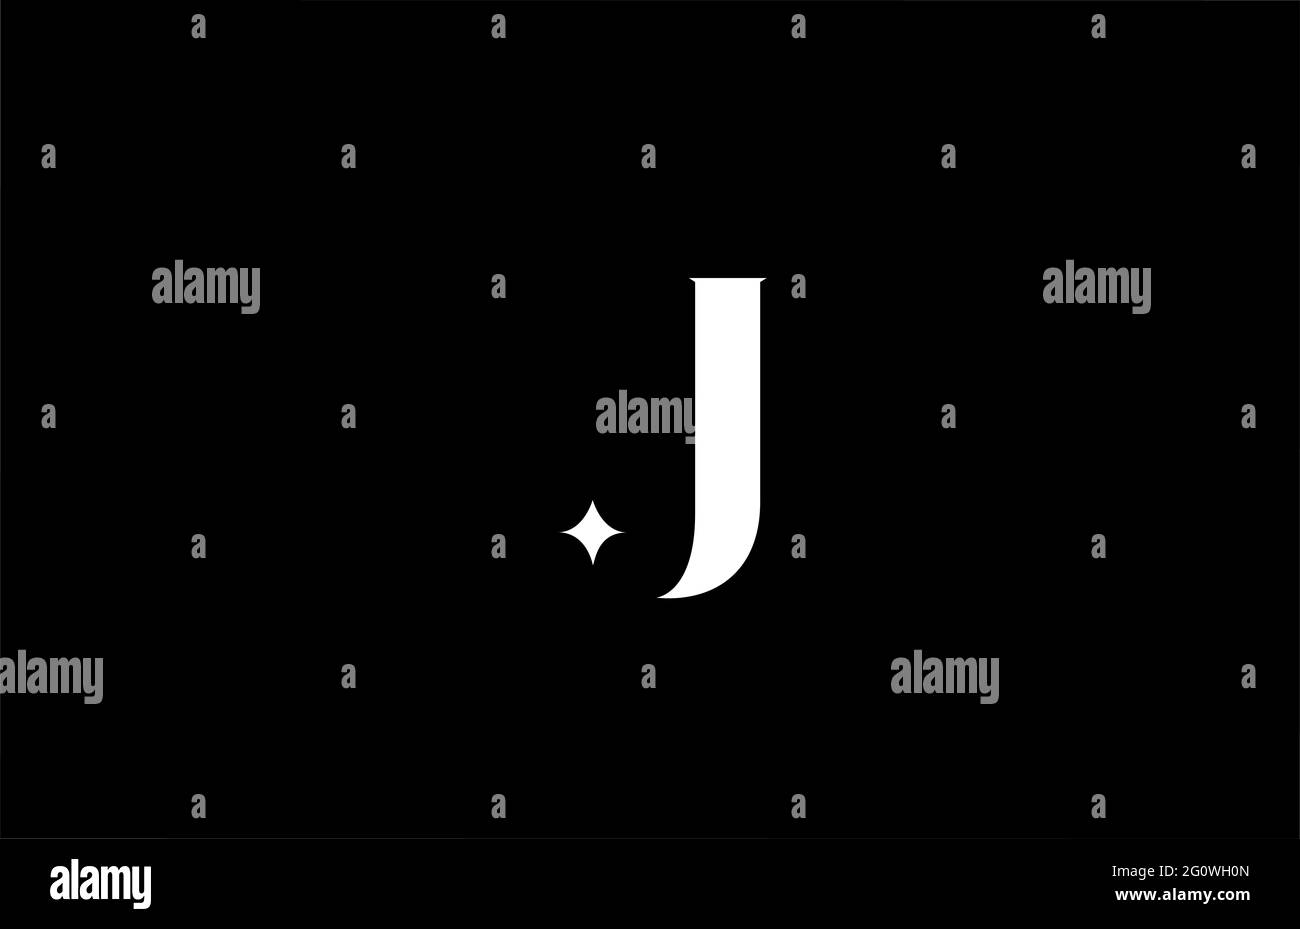 J alphabet letter logo for business and company. Creative lettering in black and white. Corporate identity branding icon design Stock Photo